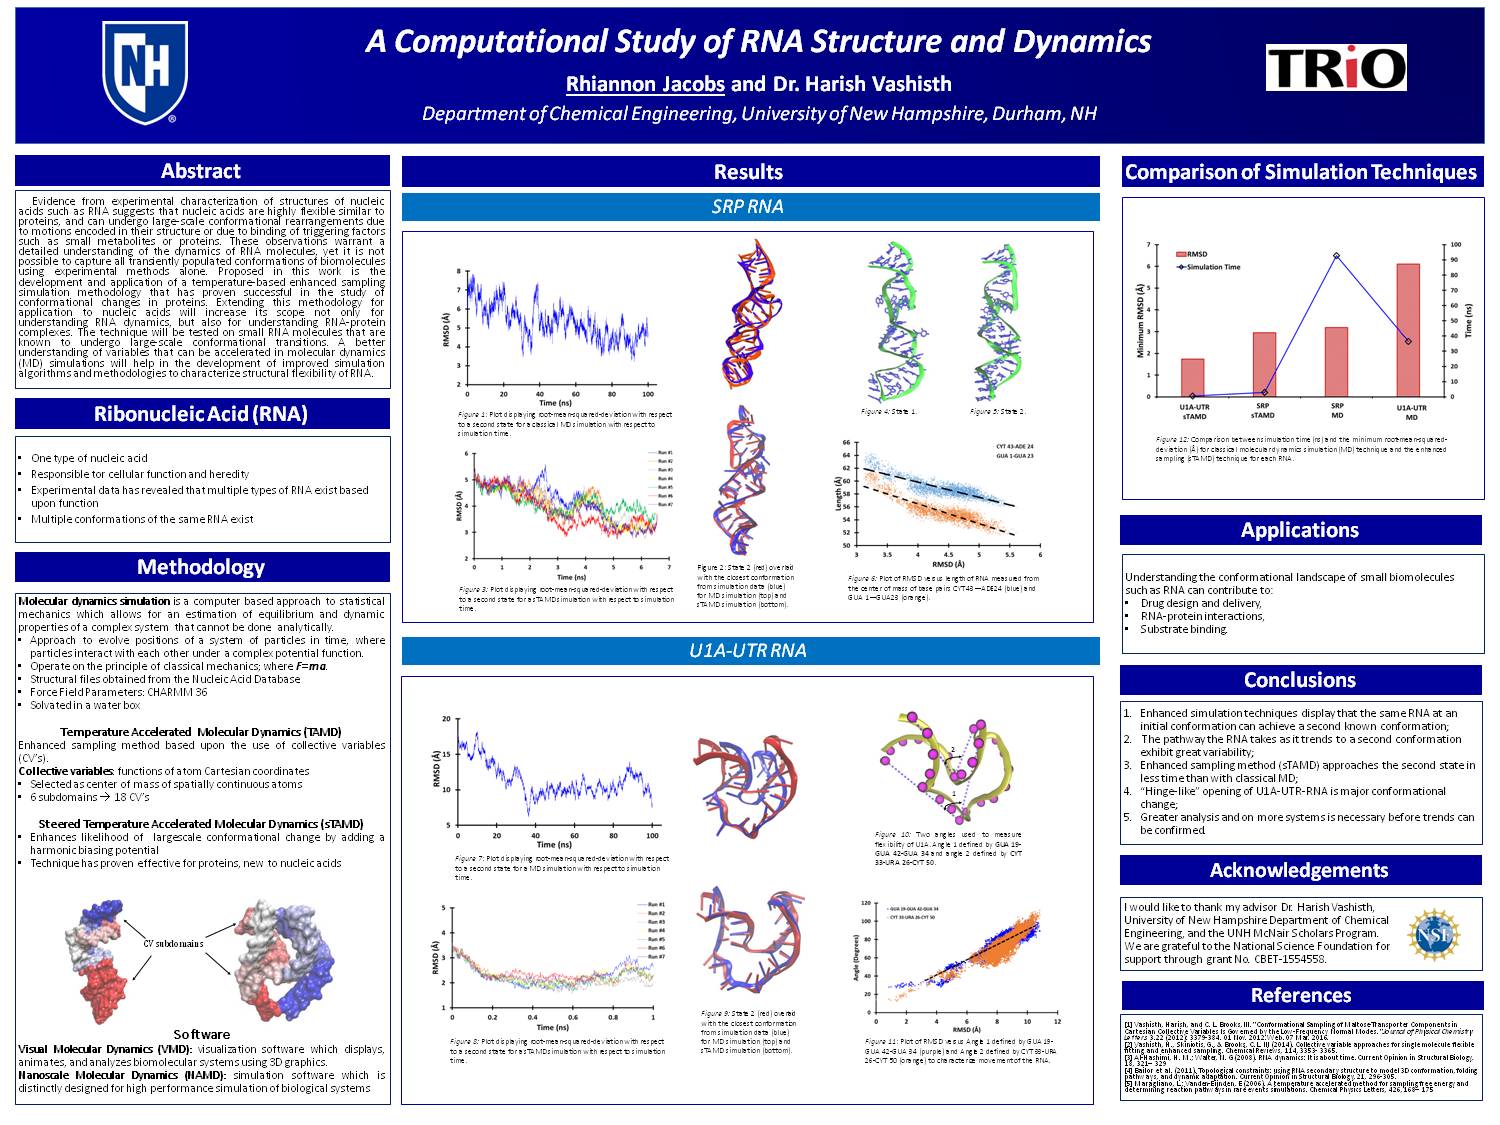 A Computational Study Of Rna Structure And Dynamics by rlk58